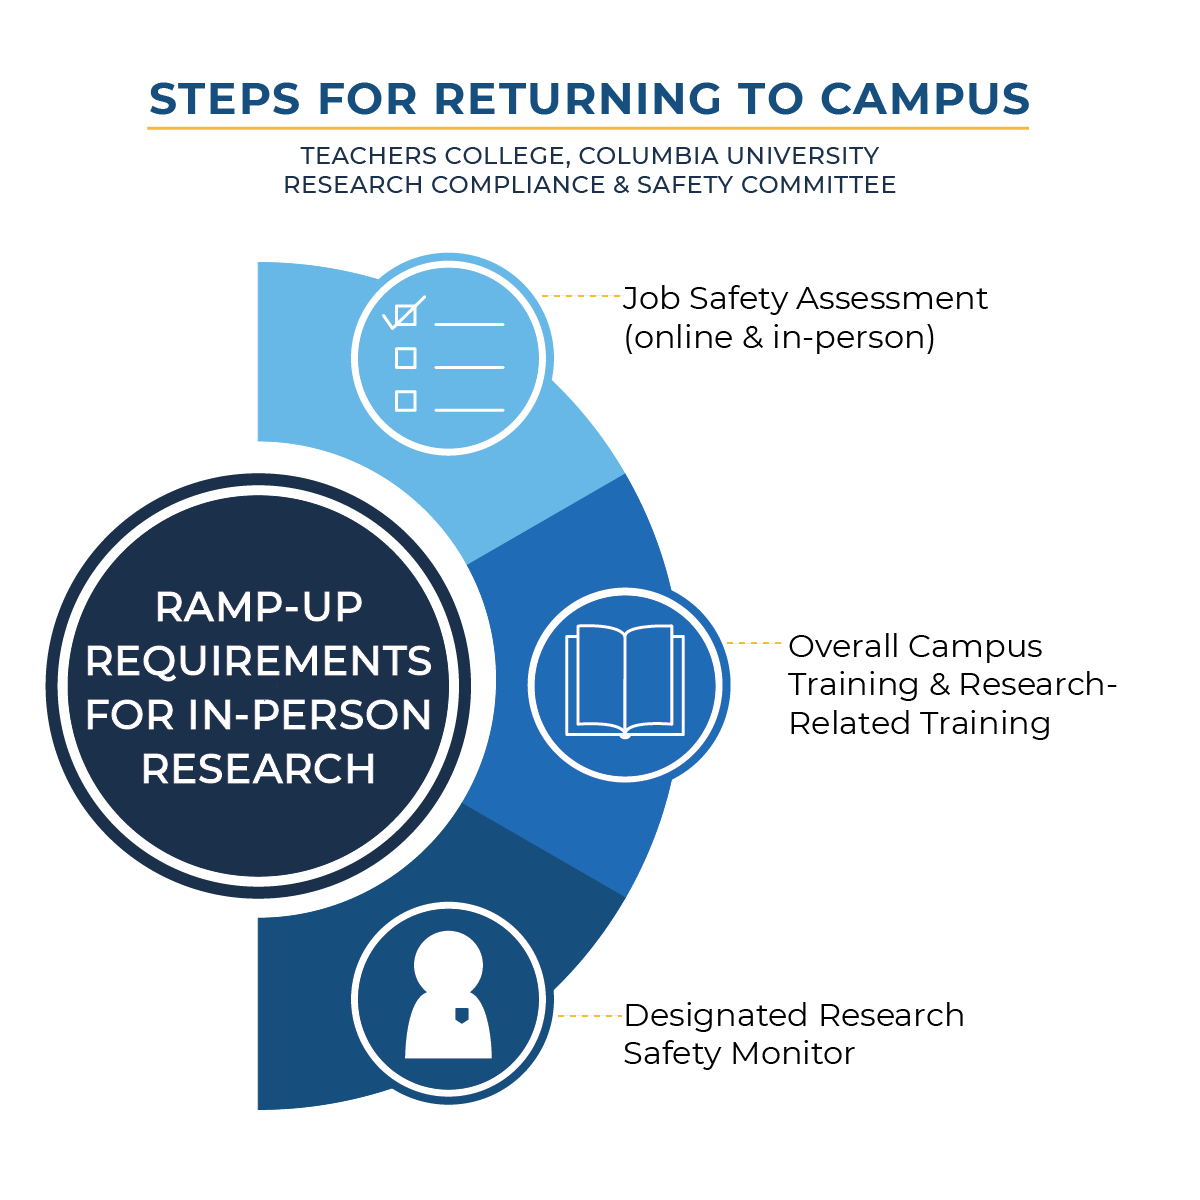 Steps for Returning to Campus for Research - Ramp Up Requirements for In-Person Research - Job Safety Assessment, Campus-wide Training, Research Safety Monitor